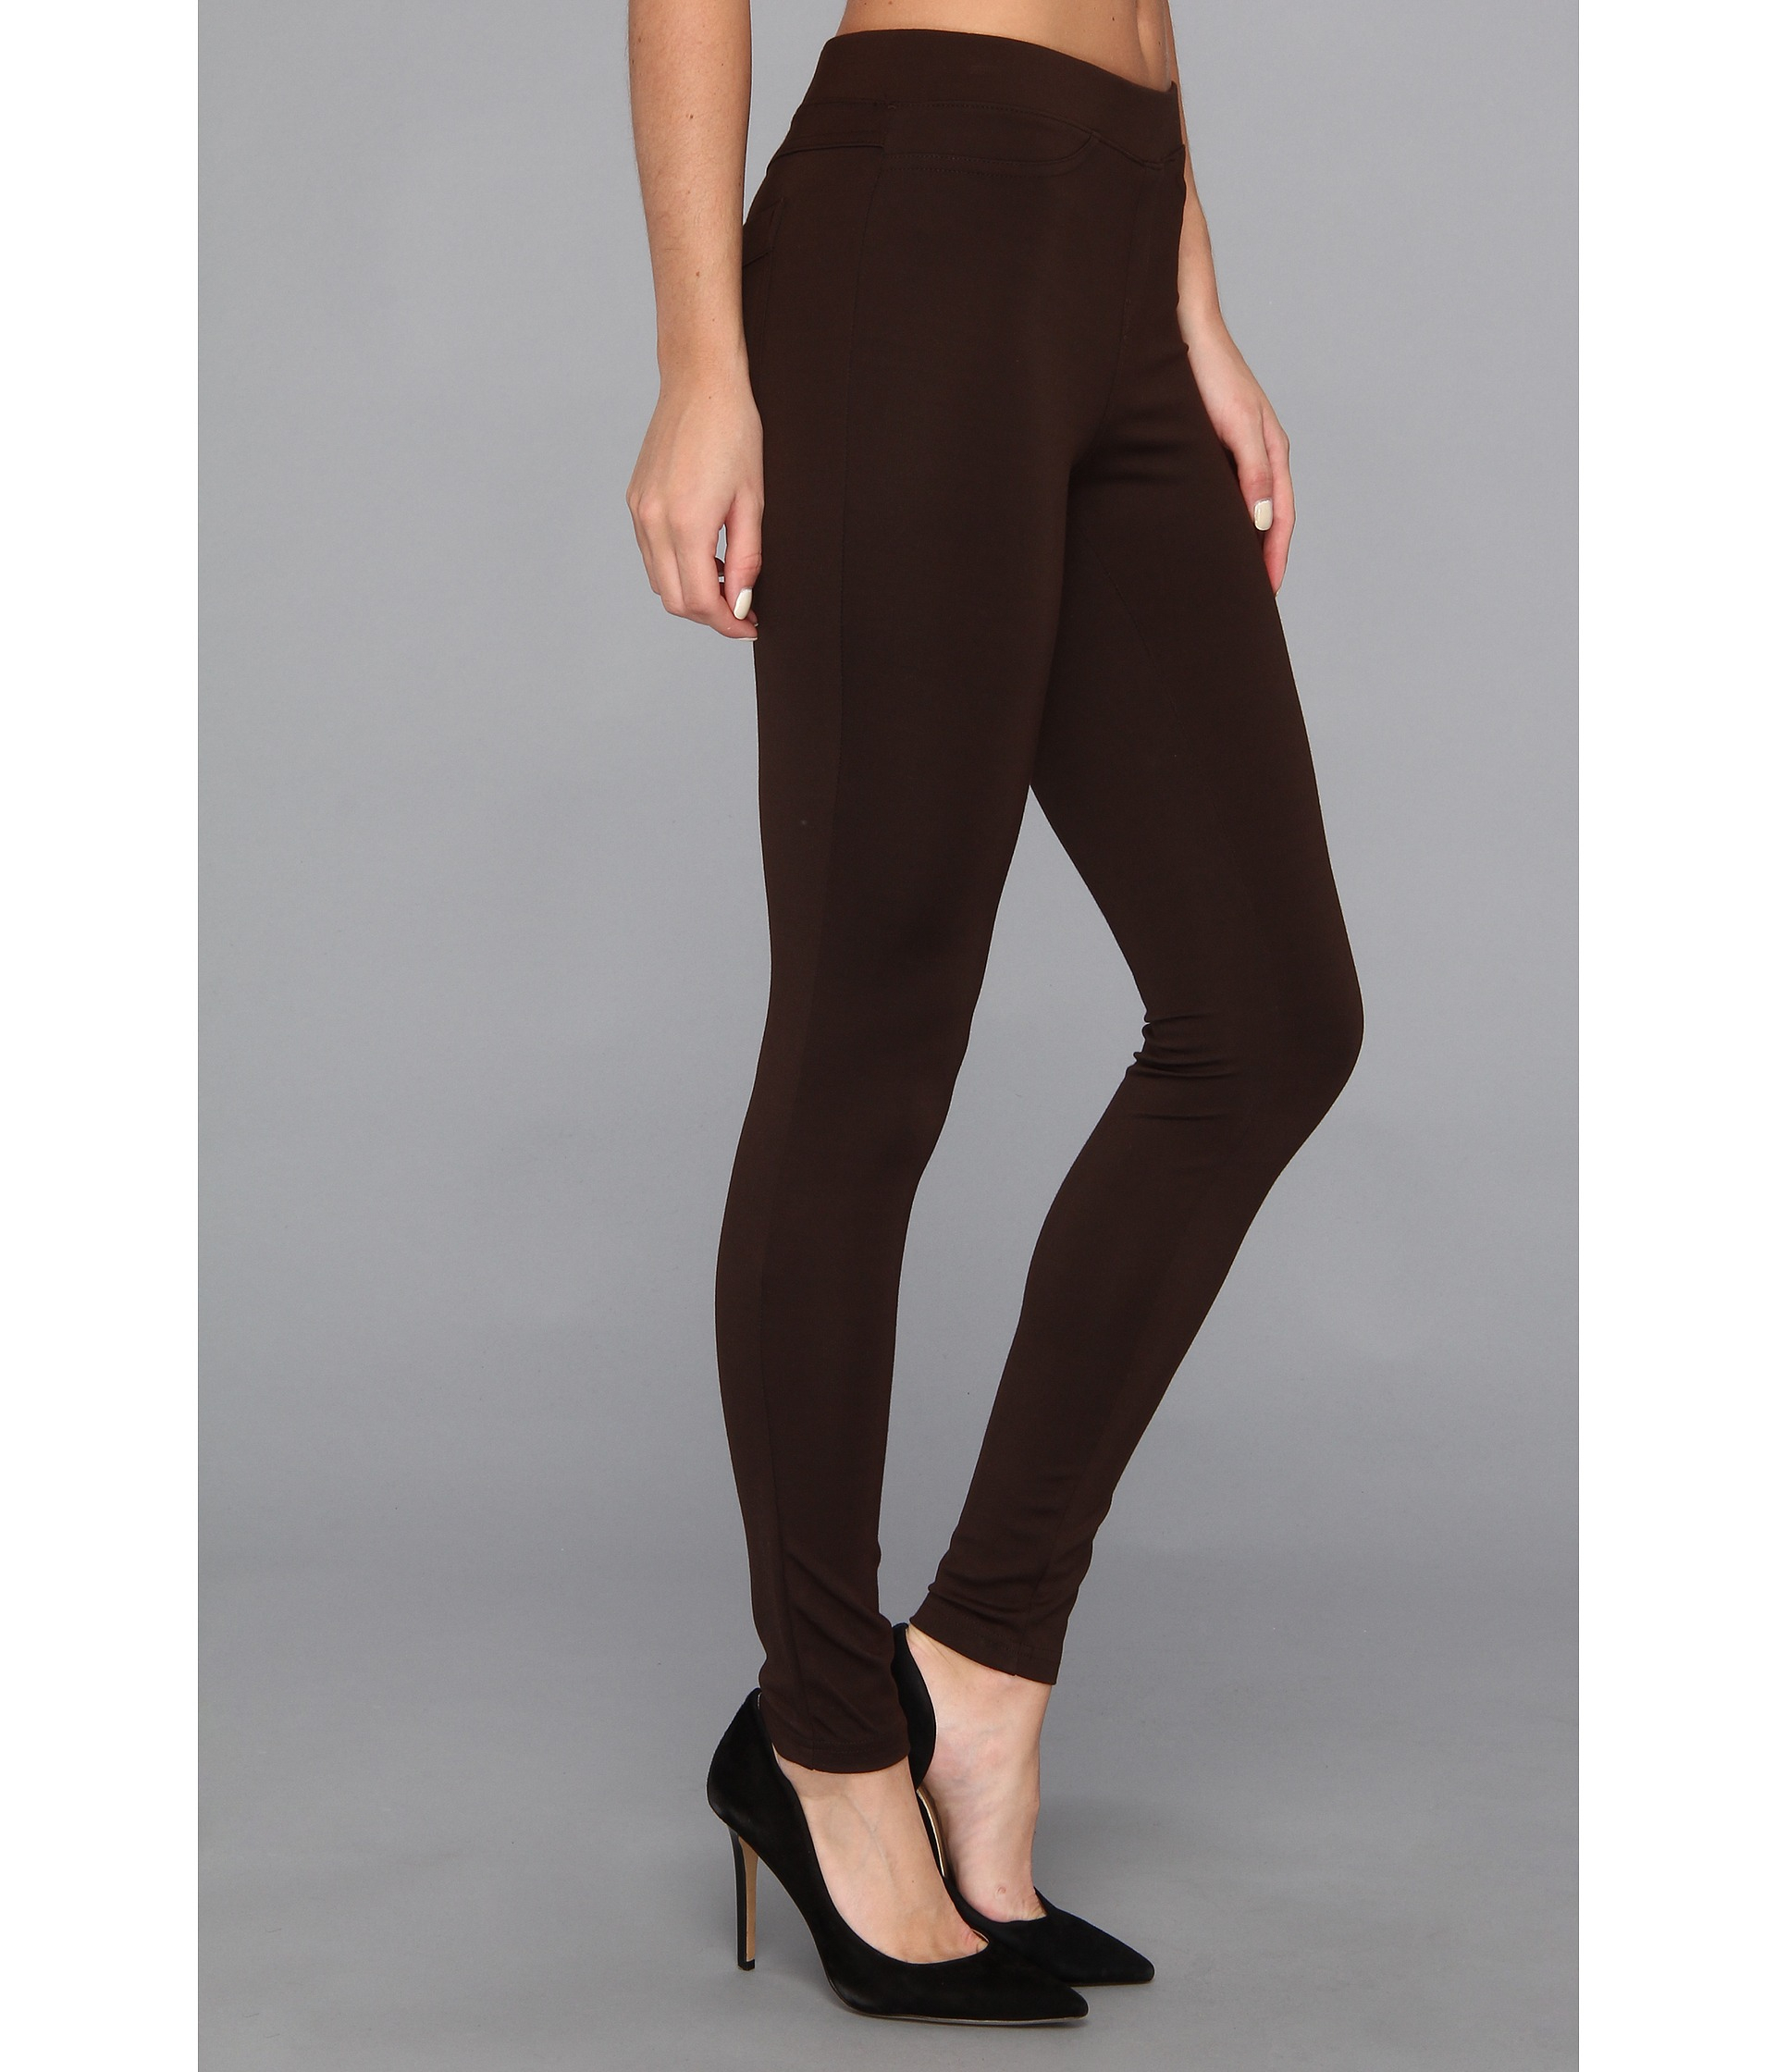 hue brown ponte double knit leggings product 1 20258081 2 698156239 normal